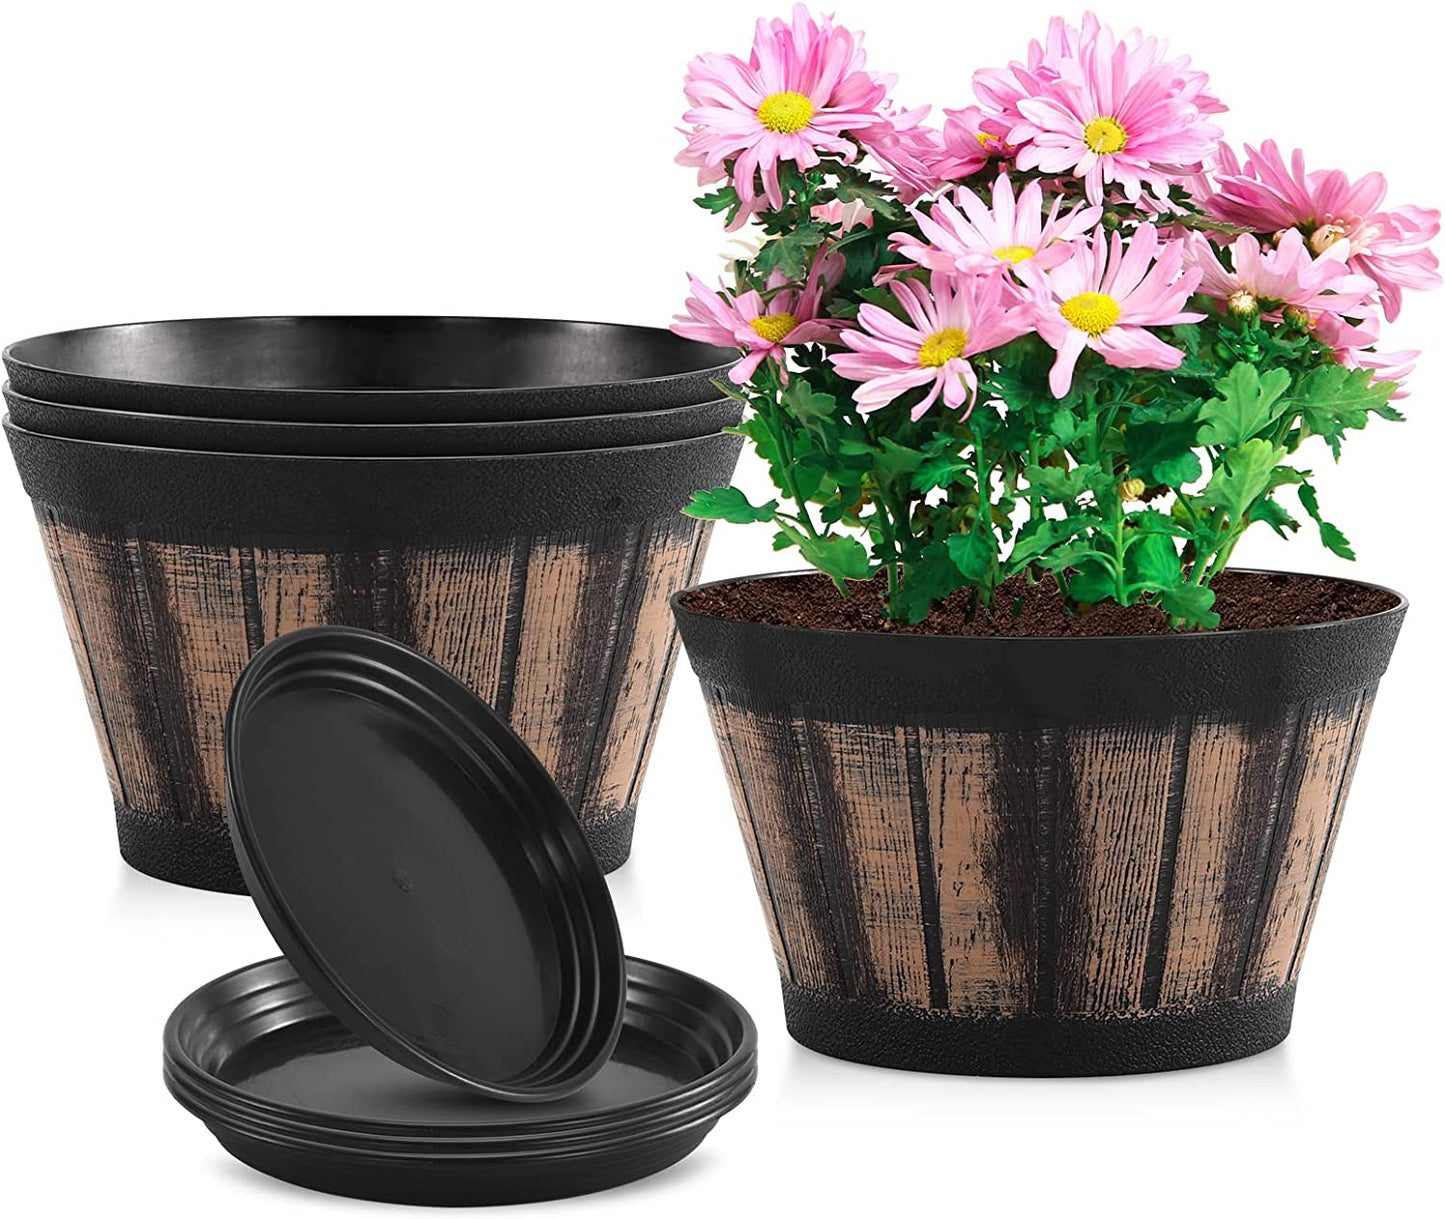 Plant Pots Set of 4 Pack 8 inch.Whiskey Barrel Planters with Drainage Holes and Saucer.Plastic Decoration Flower Pots Imitation Wine Barrel Design,Canbe for Indoor and Outdoor Garden Home Plants ( Brown)-